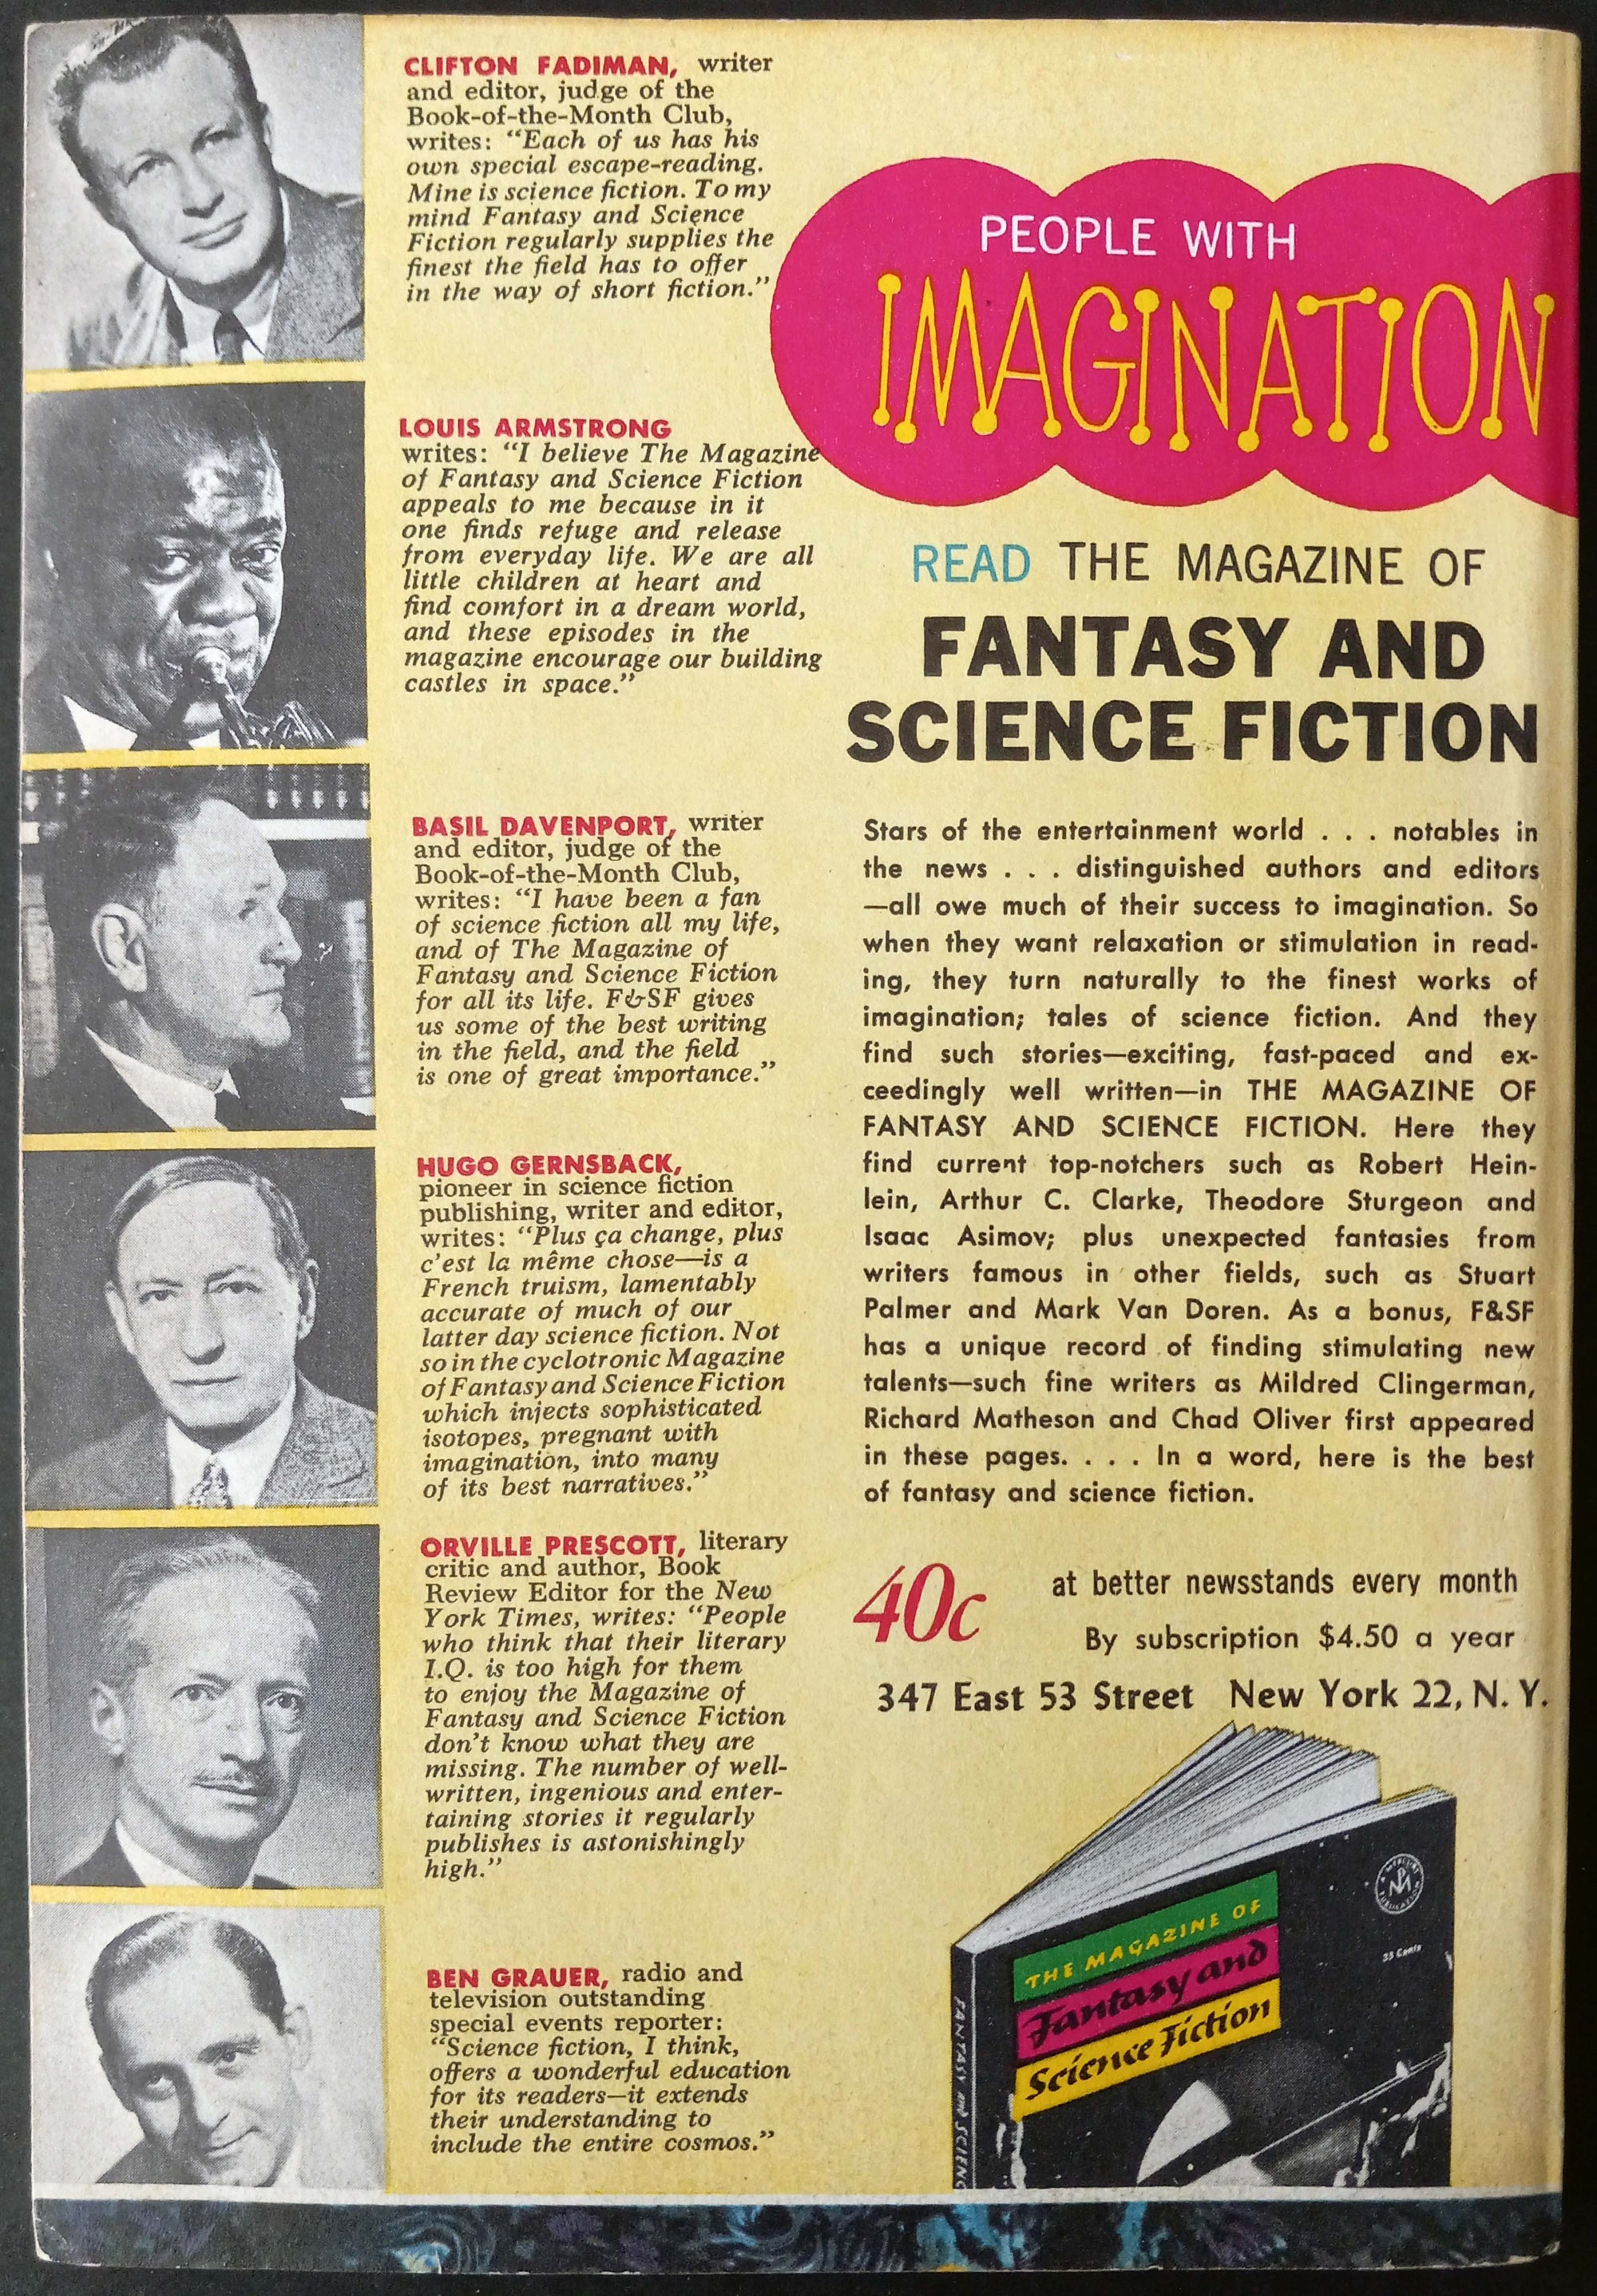 THE MAGAZINE OF FANTASY AND SCIENCE FICTION: July, 1963